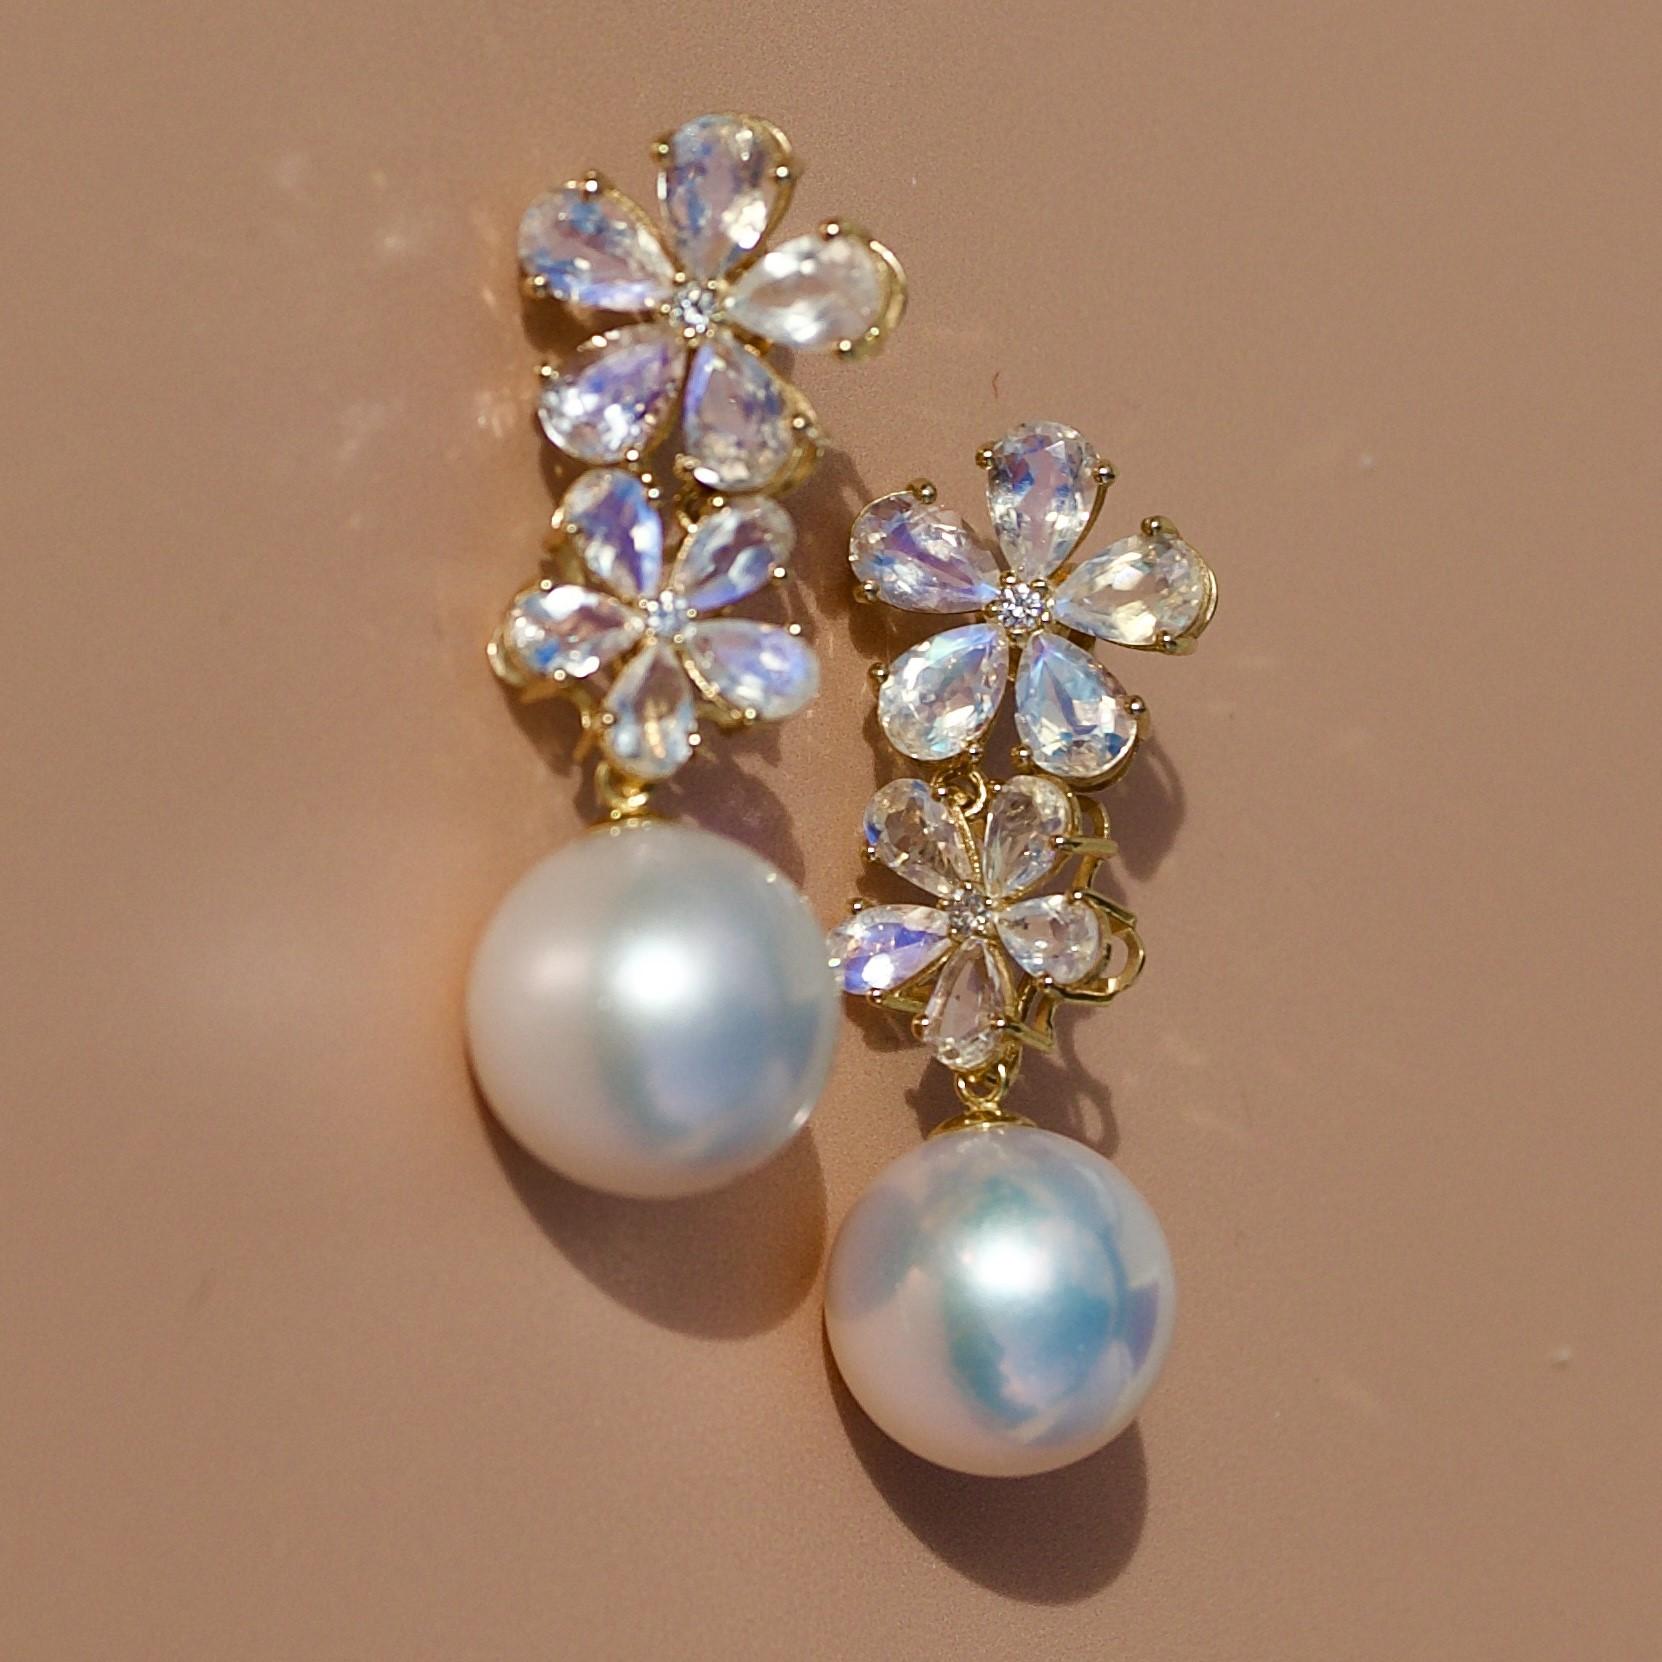 Discover Nina Zhou Moonstone Diamond Blossom and 12-13mm Pearl Convertible Drop Earrings in 18k Yellow Gold. These earrings blend the serene glow of moonstones with the timeless sparkle of diamonds, all cradled in a delicate, nature-inspired blossom